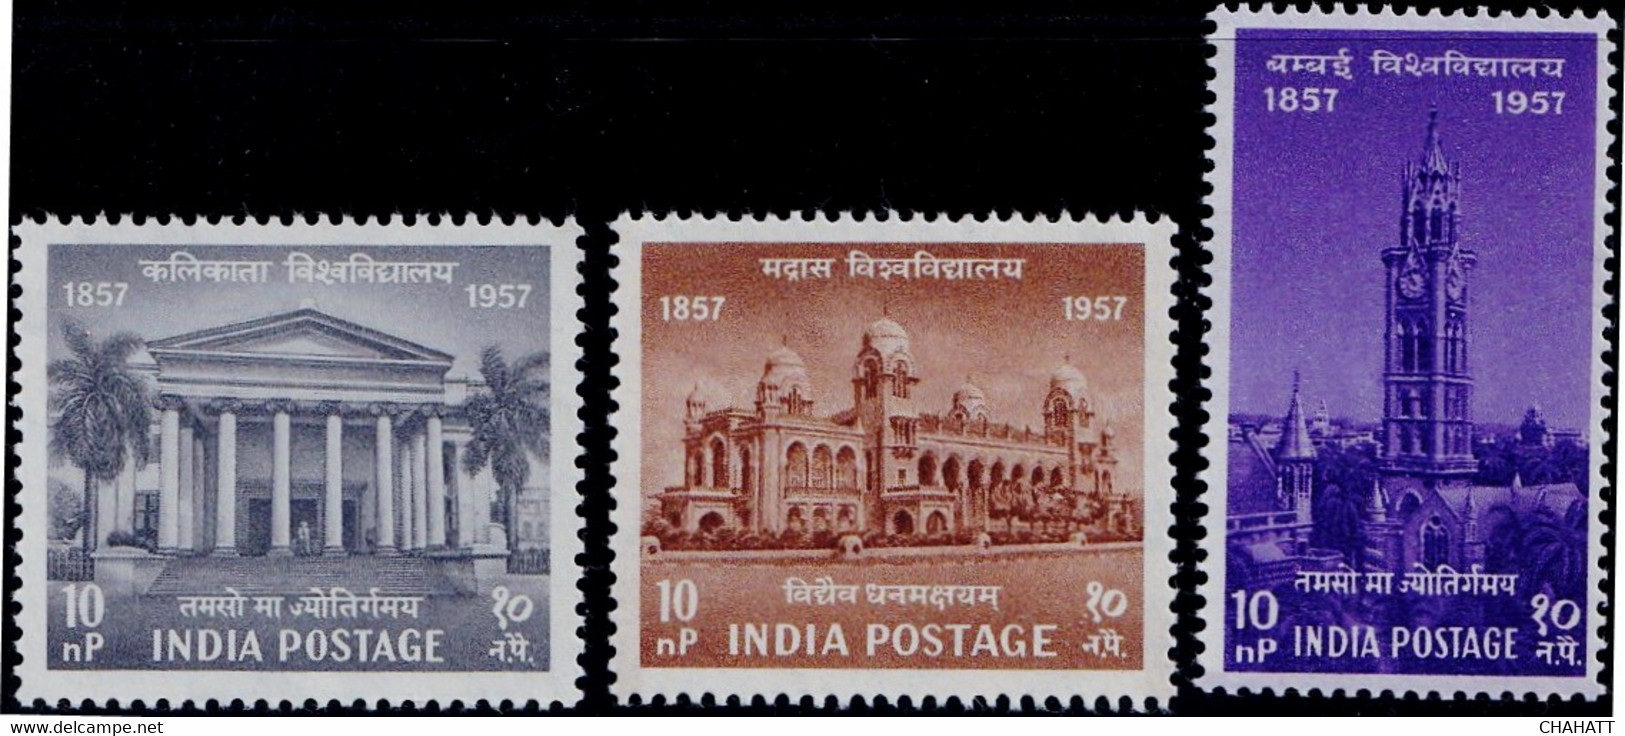 EDUCATION- UNIVERSITIES OF KOLKATA, MADRAS AND BOMBAY- SET OF 3- INDIA-1957- MNH-D5-107 - Unused Stamps